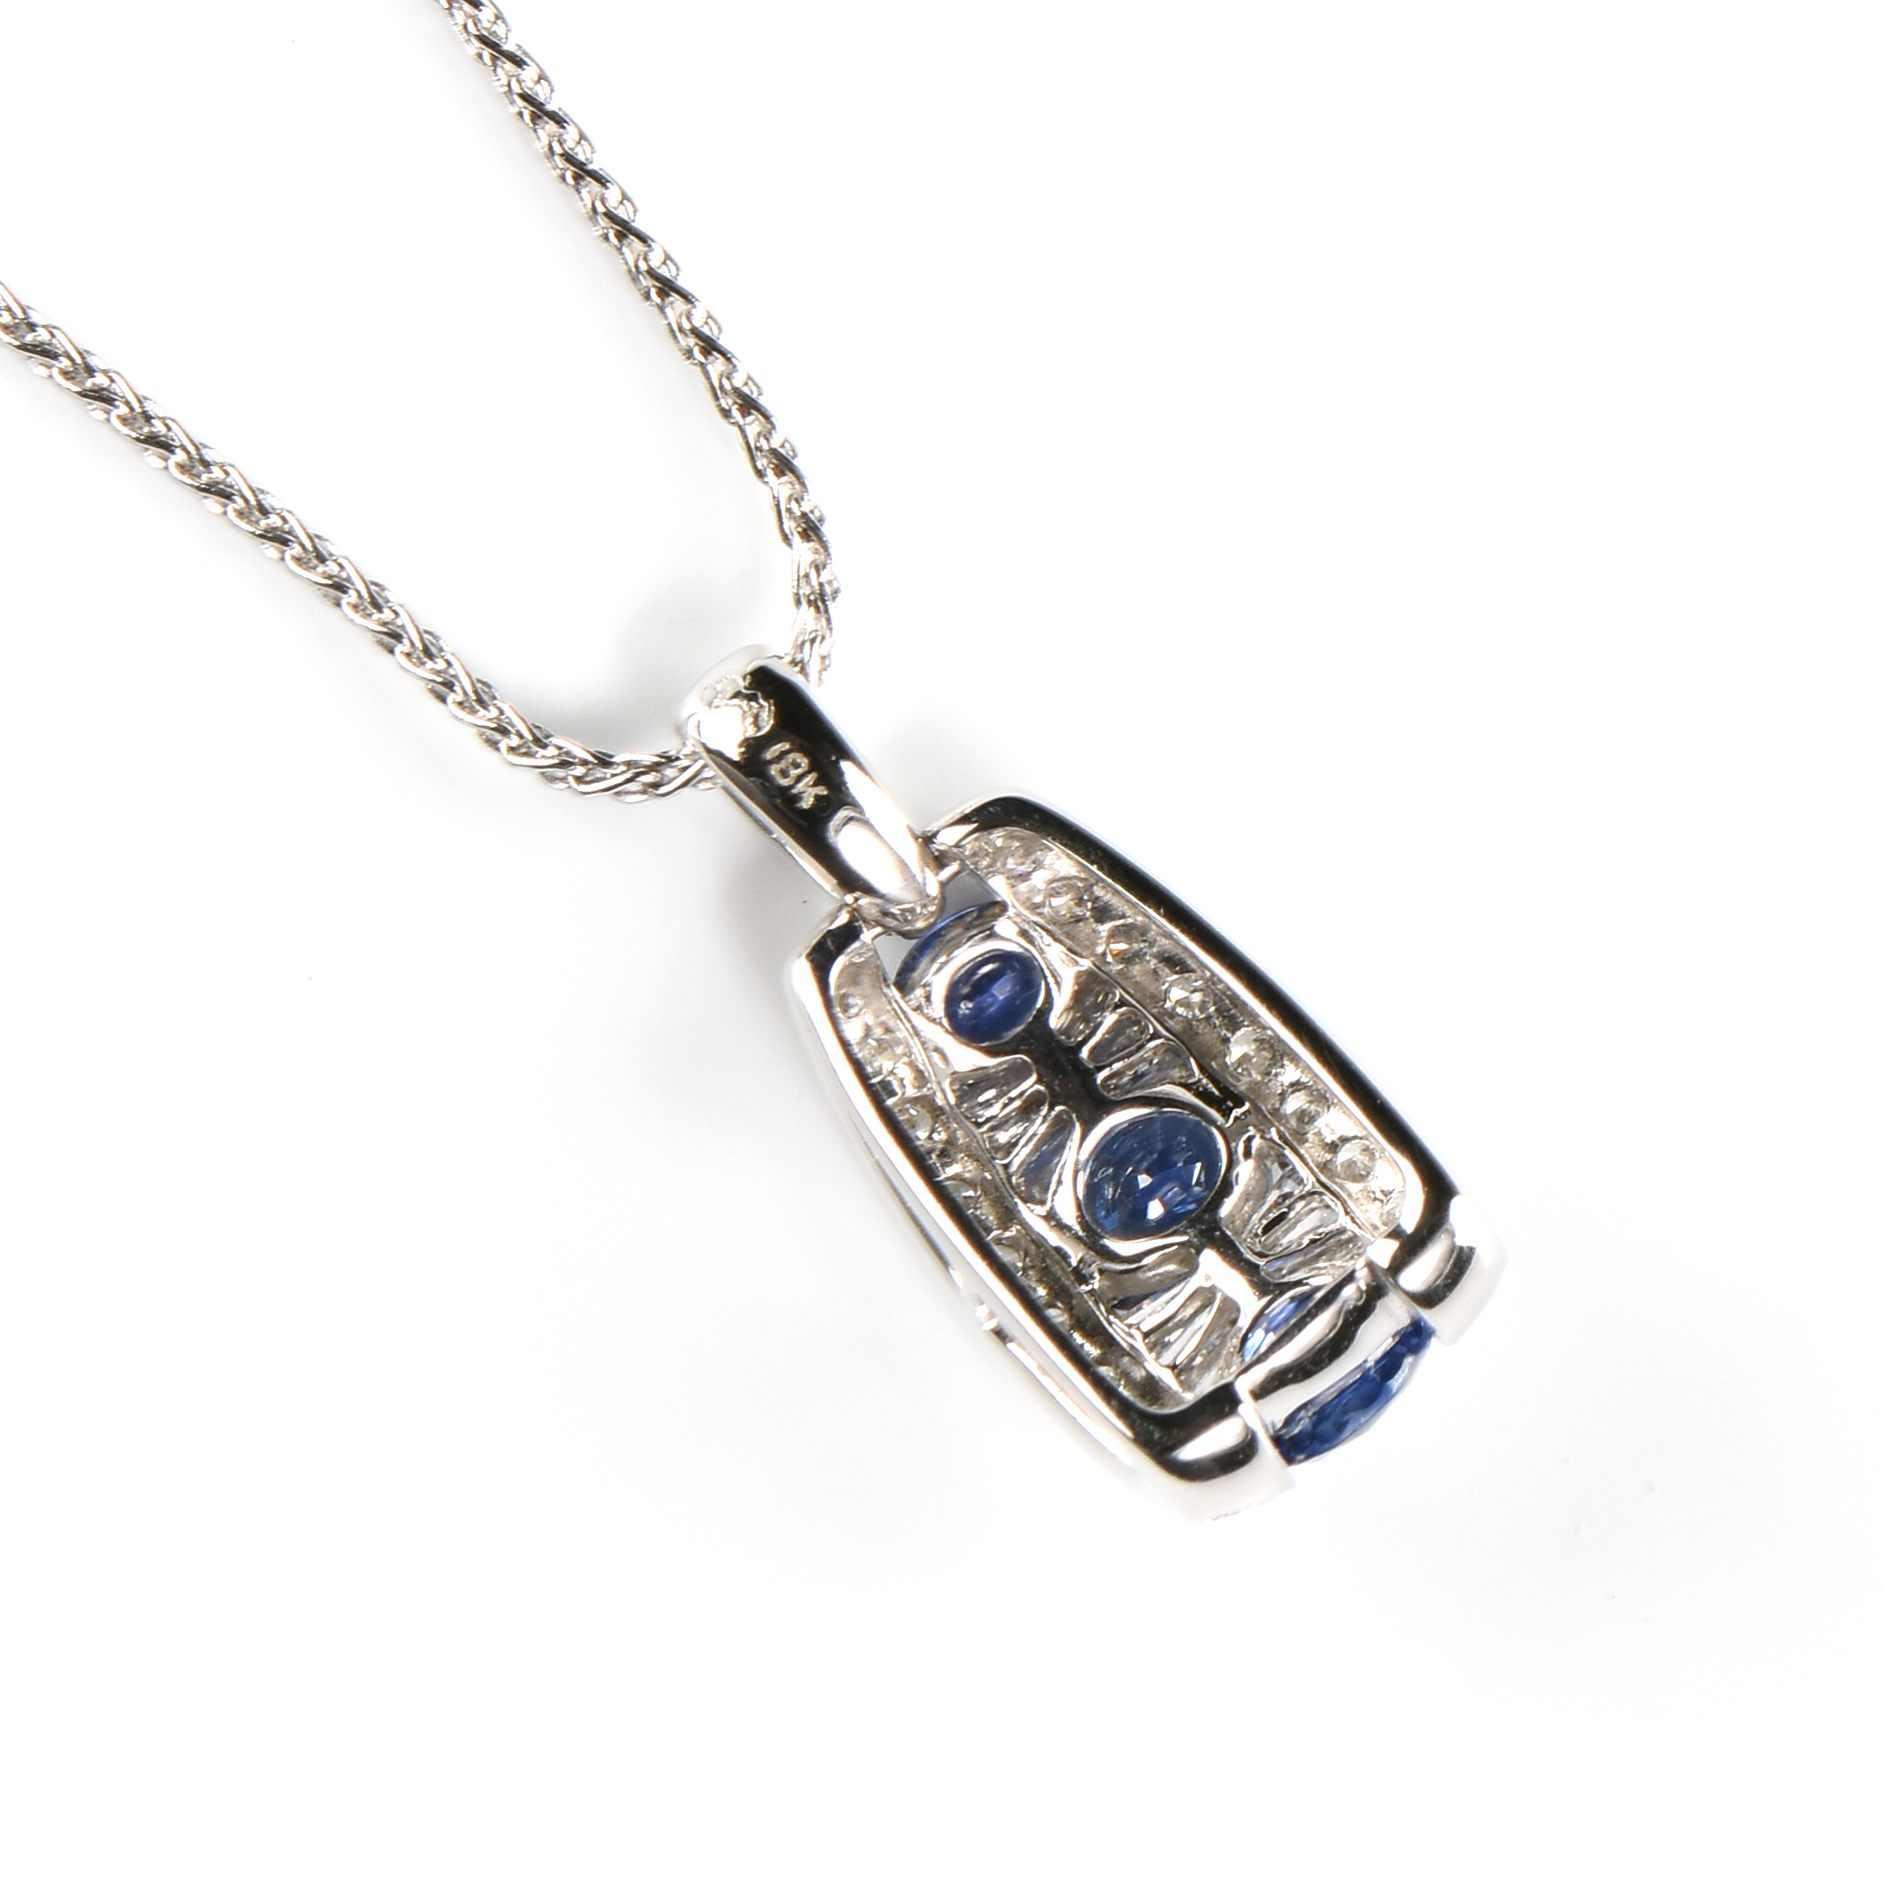 A DE HAGO STYLE 18K WHITE GOLD, DIAMOND, AND SAPPHIRE PENDANT WITH NECKLACE, 20TH CENTURY, a cascade - Image 2 of 2